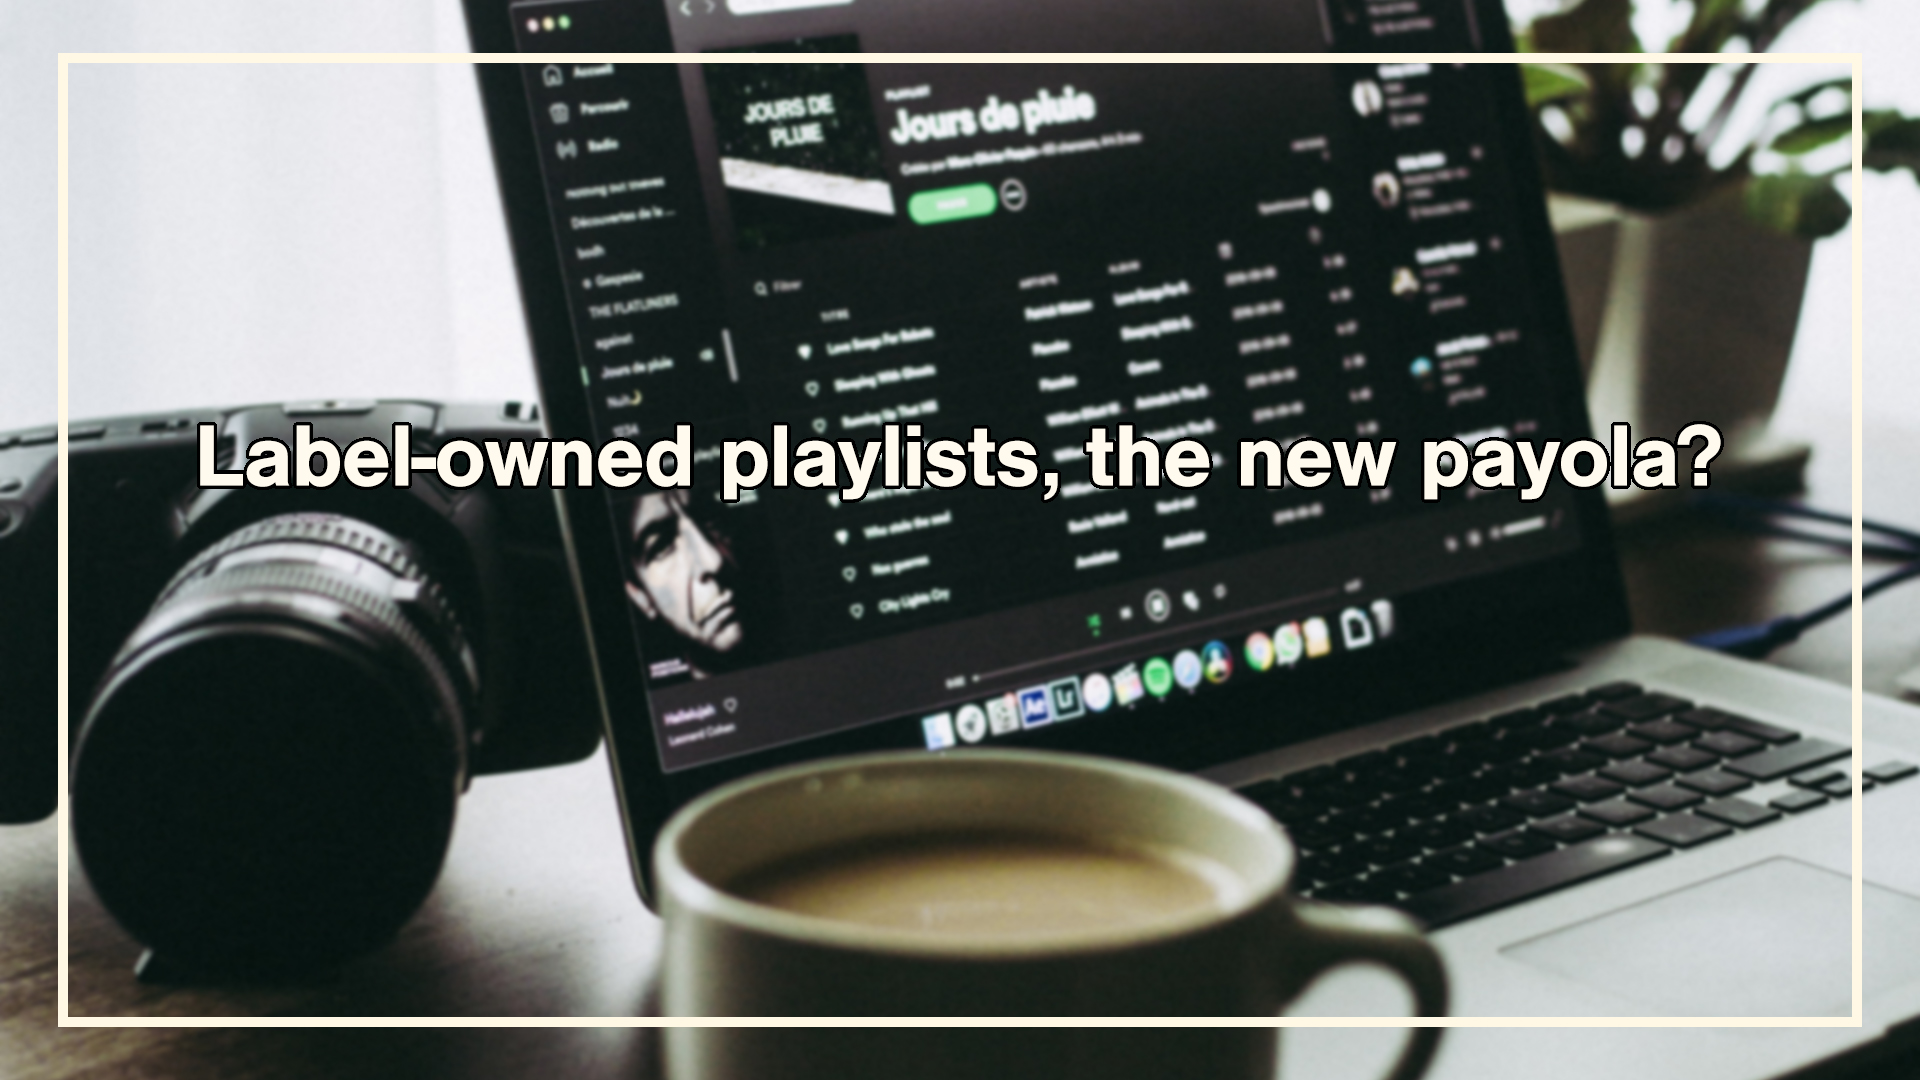 An image of a spotify playlist with the words "label-owned playlists, the new payola?" written in front